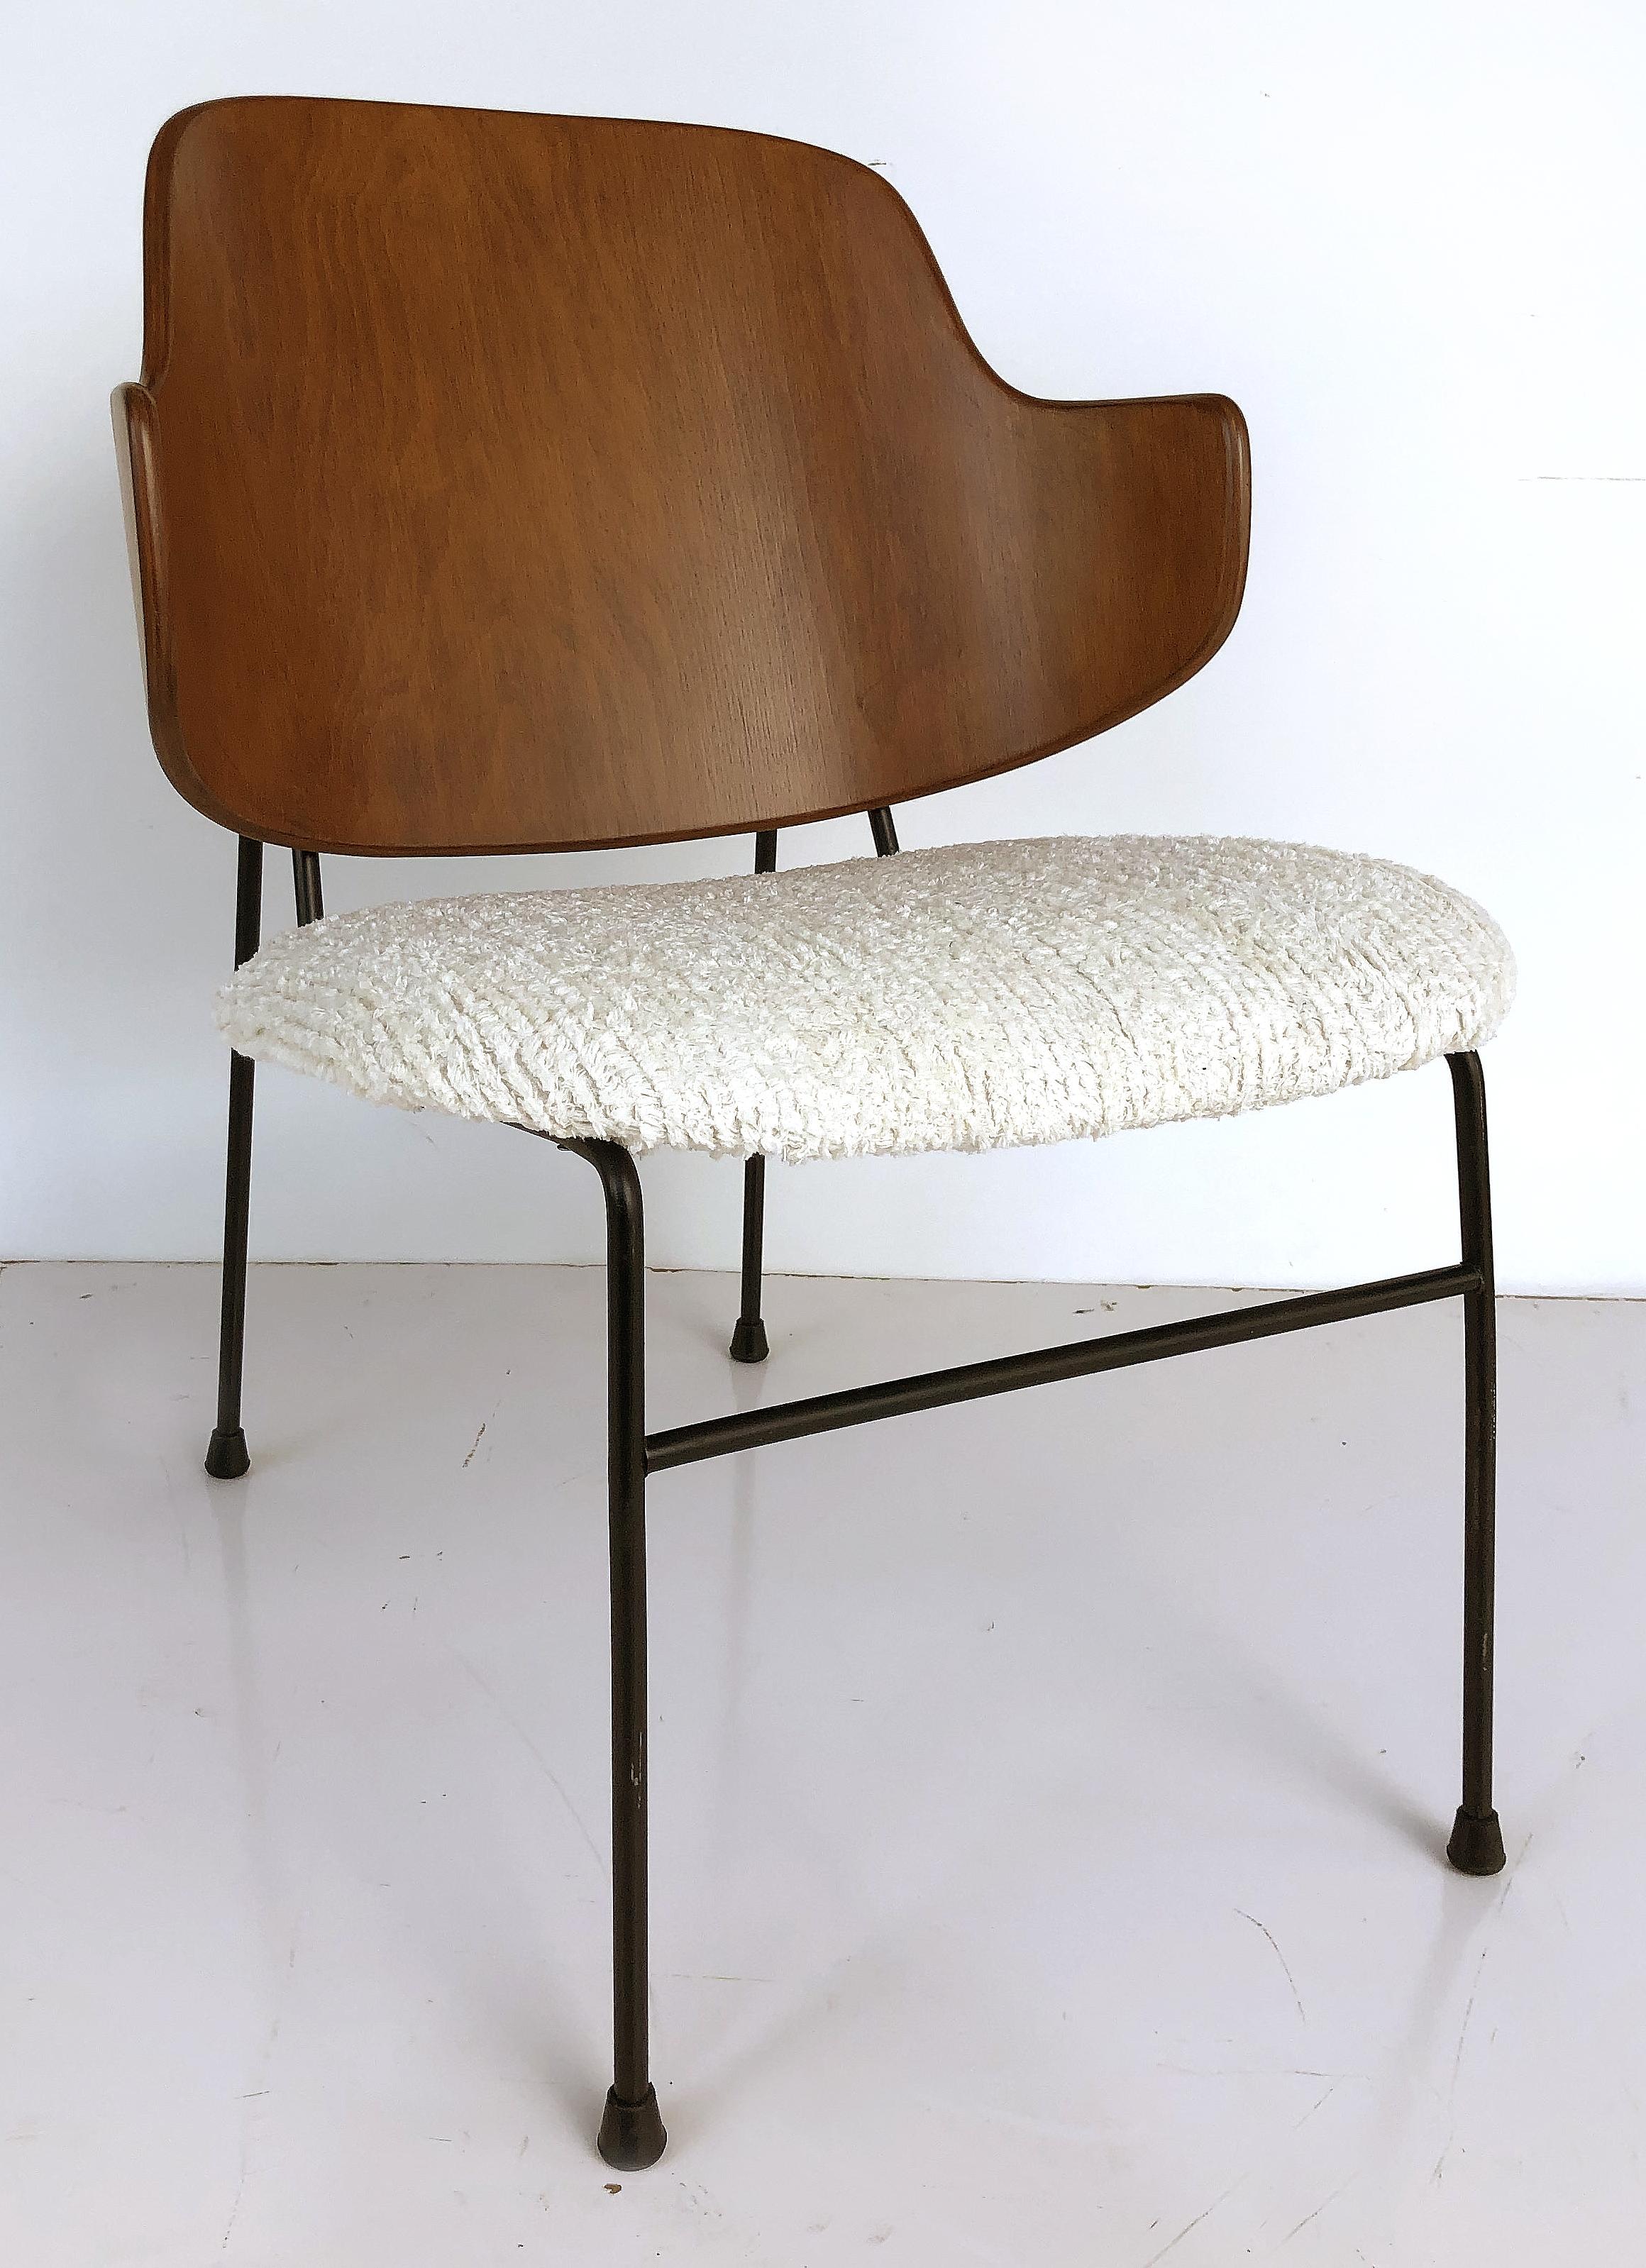 1950s Penguin chair by Ib Kofod Larsen, restored

Offered for sale is an Iconic Penguin chair by Ib Kofod-Larsen. This great 1950s Danish modern chair has been completely restored to its former glory. The chair was made in Denmark and imported to